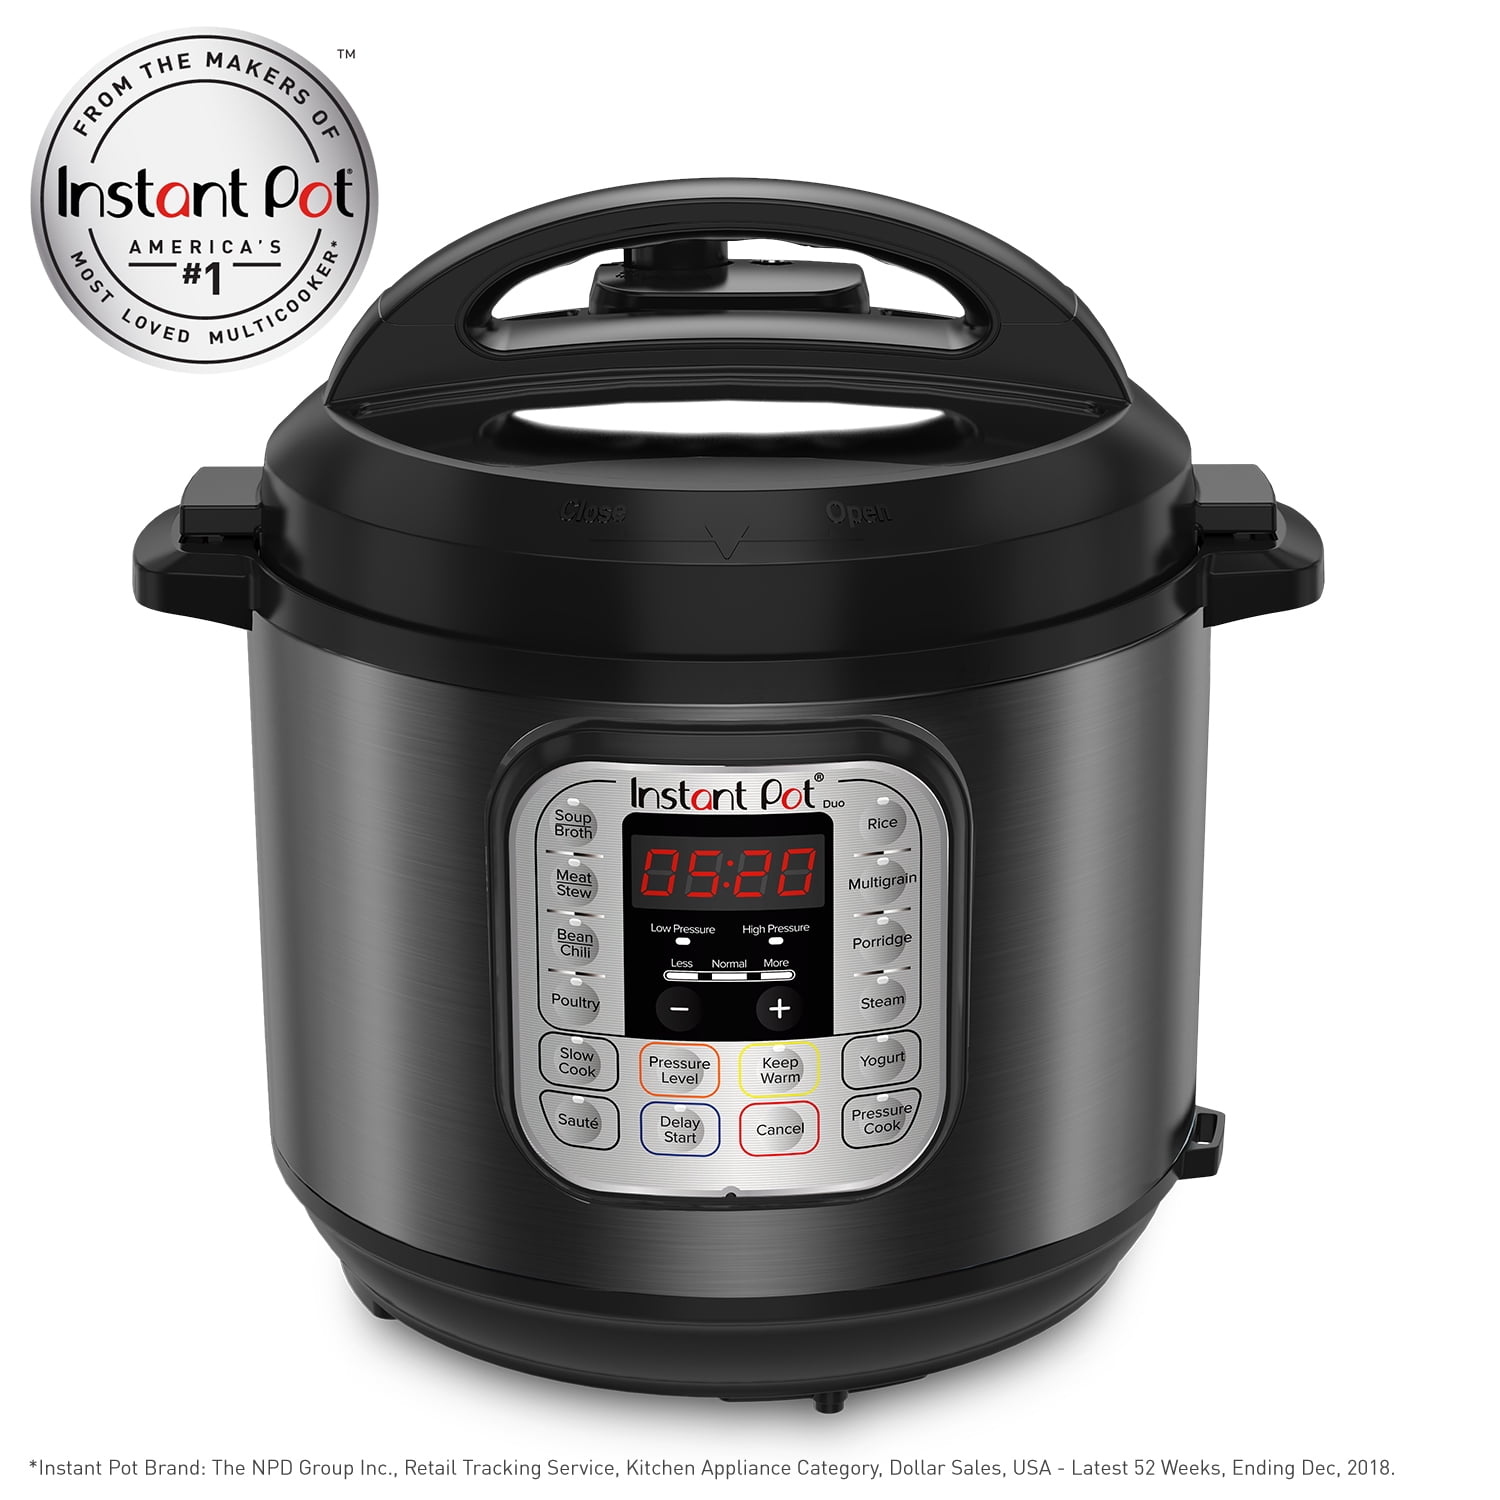 Instant Pot DUO60 Black Stainless 6-Quart 7-in-1 Multi-Use Programmable Pressure  Cooker, Slow Cooker, Rice Cooker, Sauté, Steamer, Yogurt Maker and Warmer 